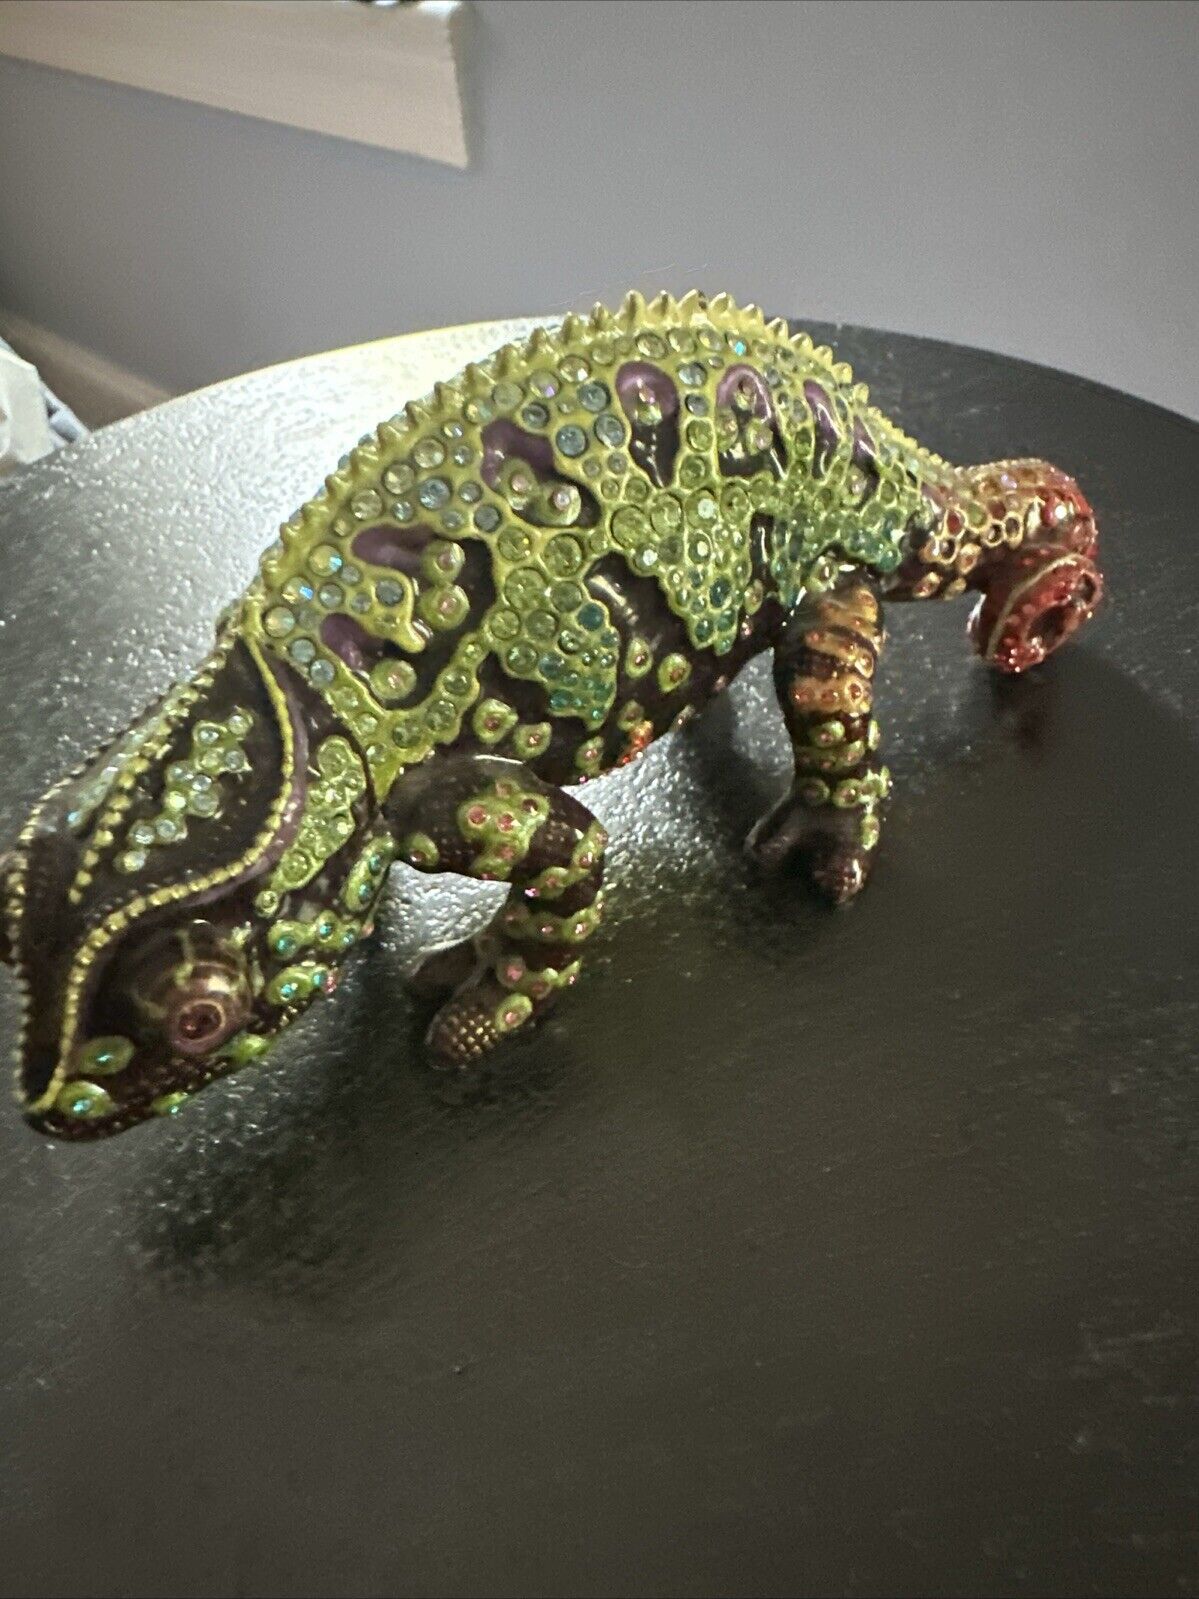 Magnificent Jay Strongwater Crystal Encrusted Chameleon LOUIE 6